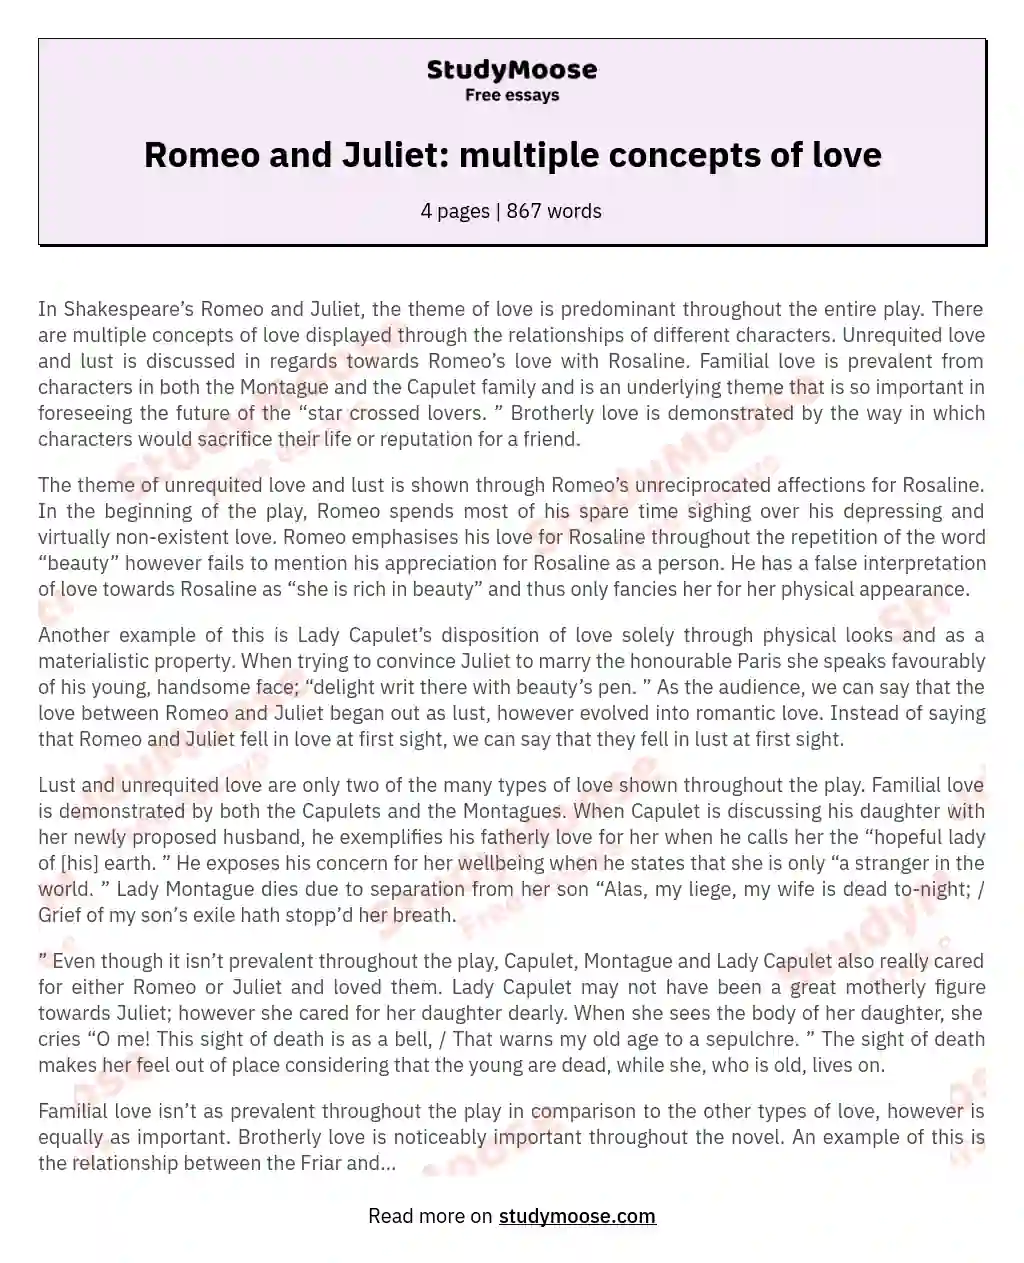 Romeo and Juliet: multiple concepts of love